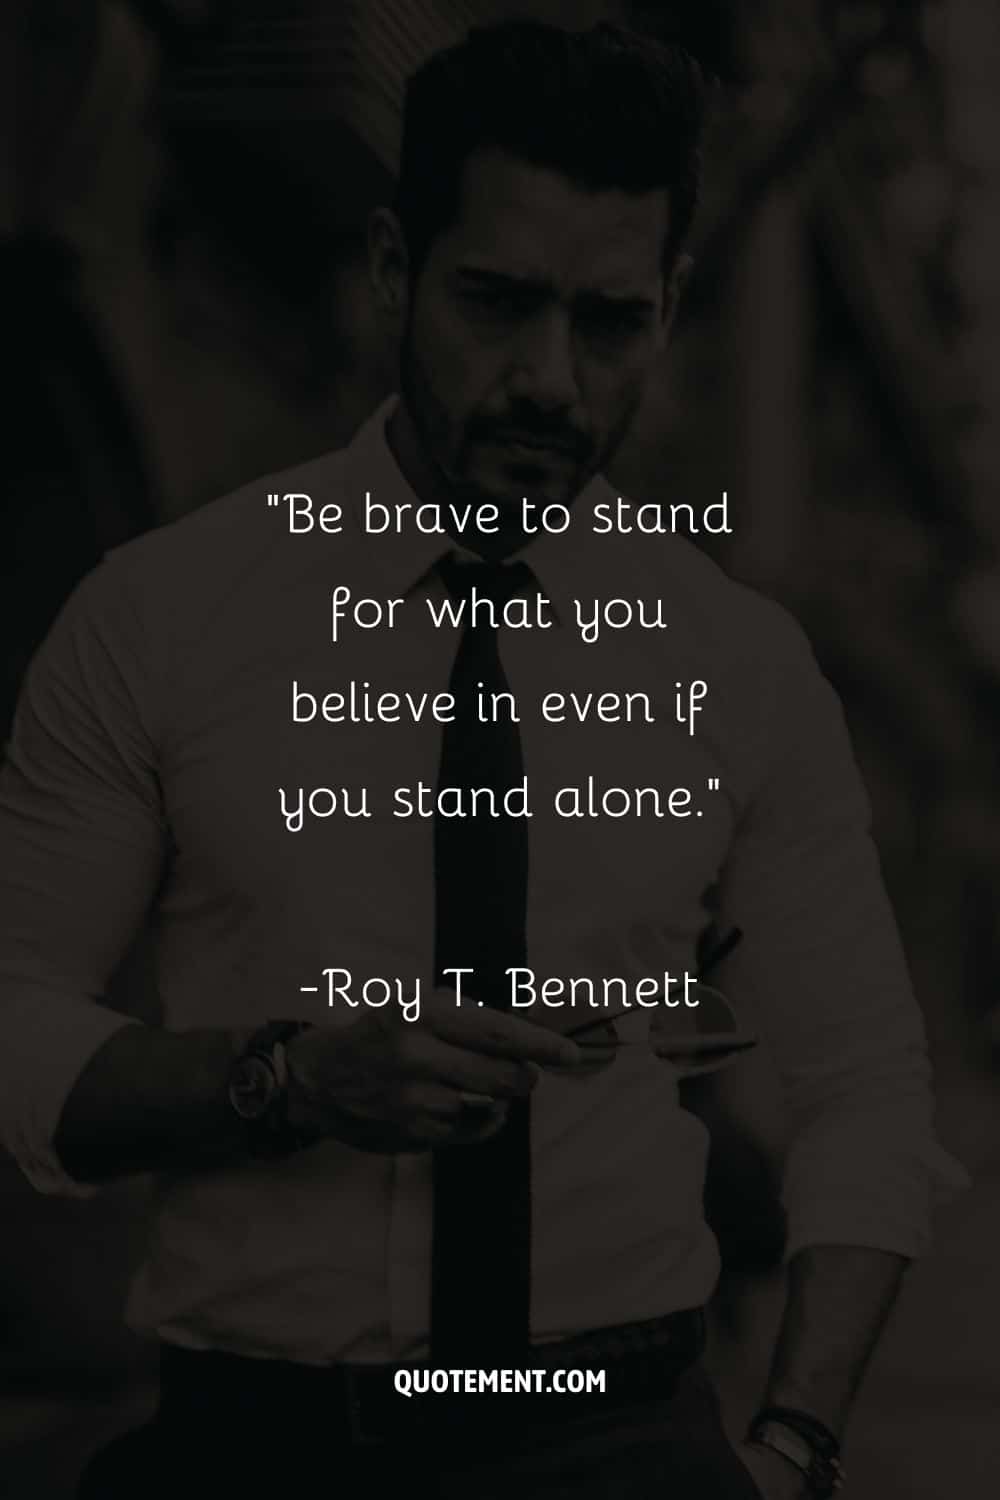 “Be brave to stand for what you believe in even if you stand alone.” ― Roy T. Bennett, The Light in the Heart